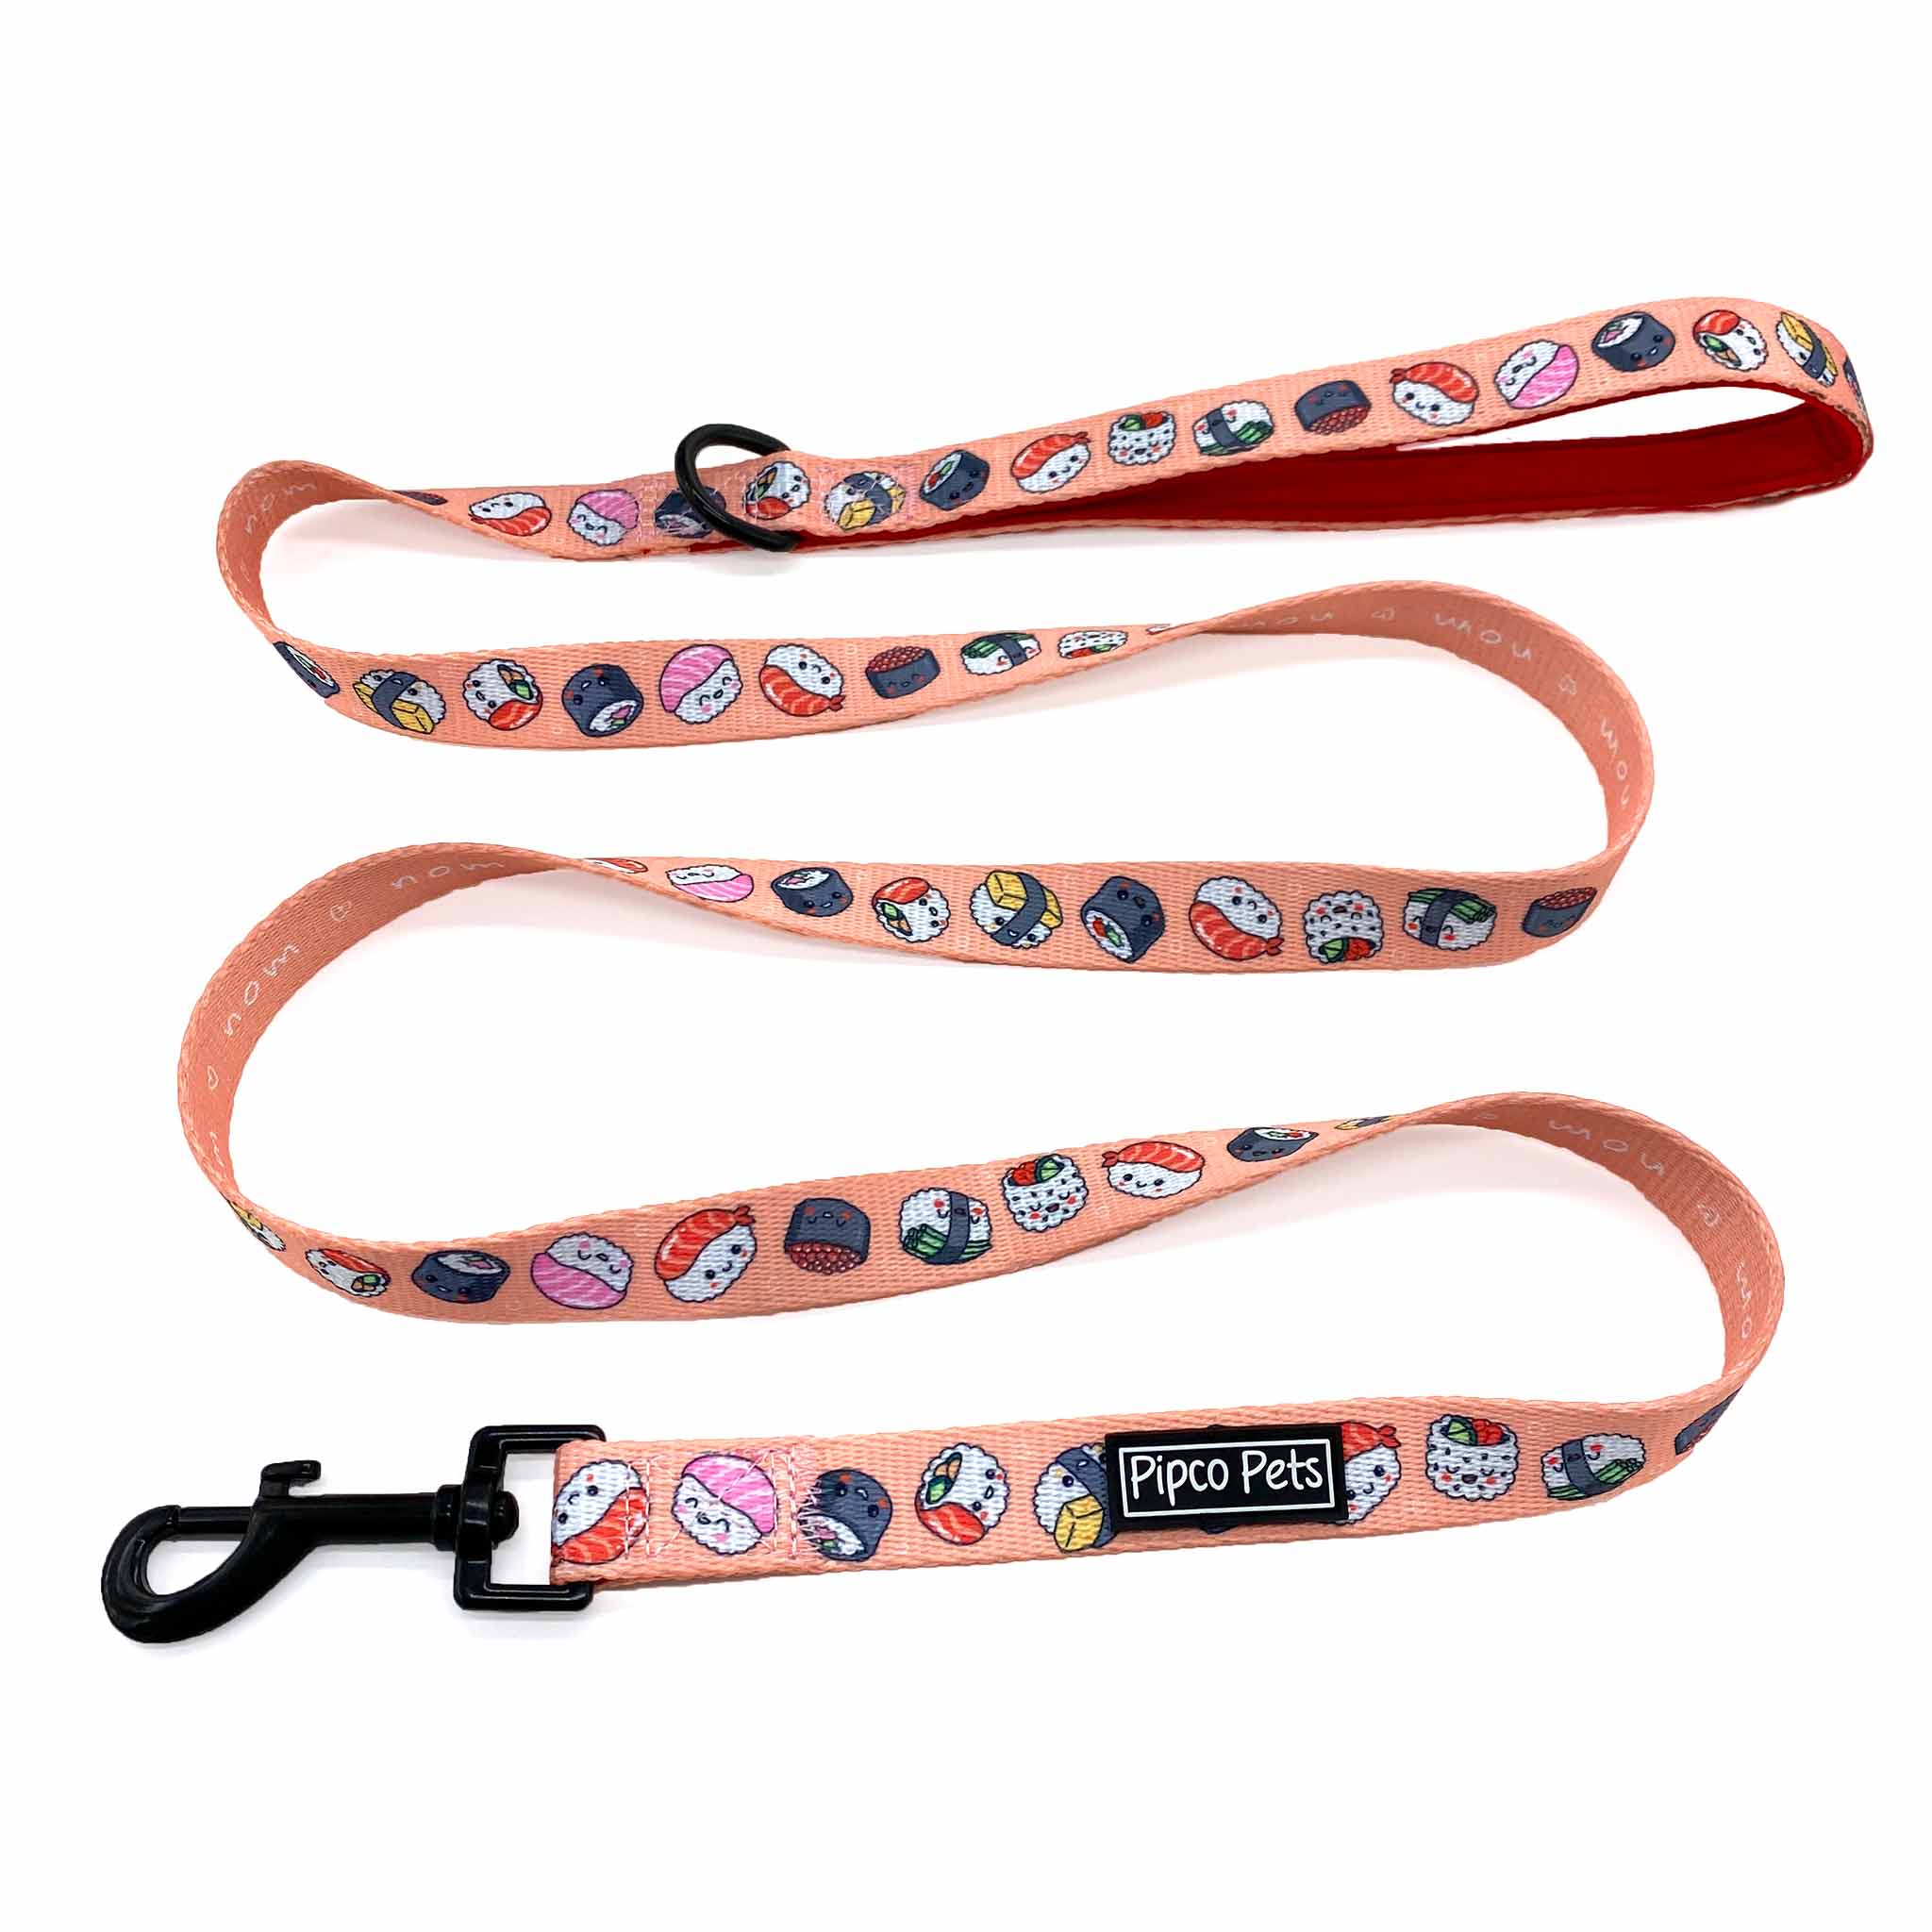 Pipco Pets dog leash  with Sushi Train print pattern in pink